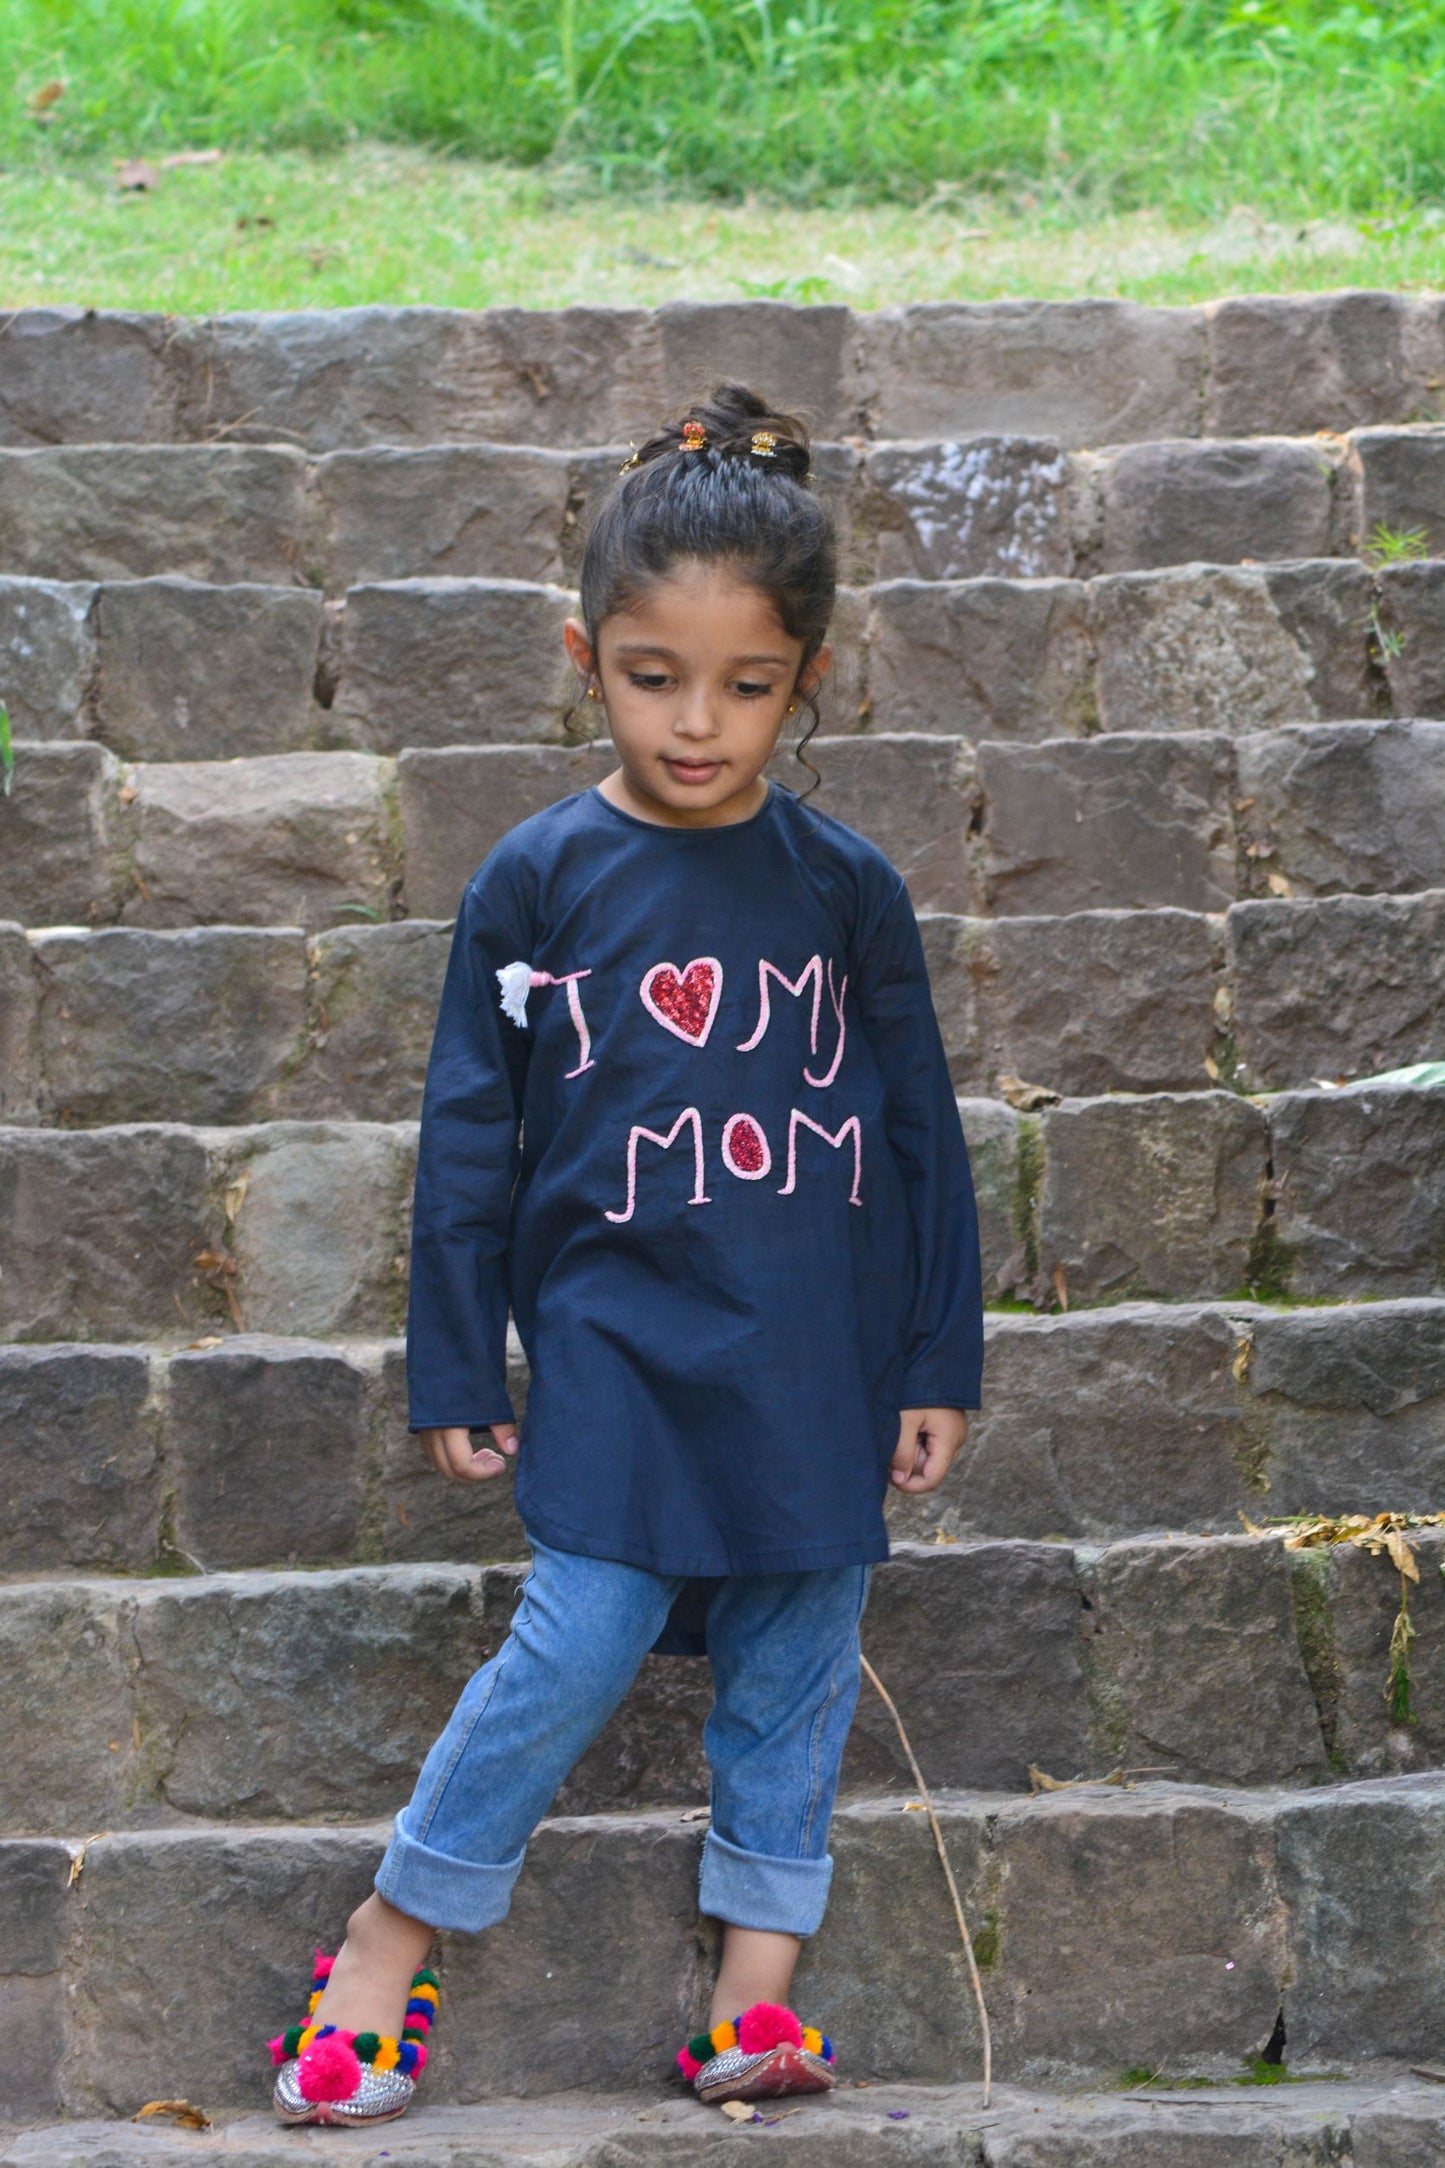 Cambric Shirt with handmade embroidery "I Love my Mom/Daughter"